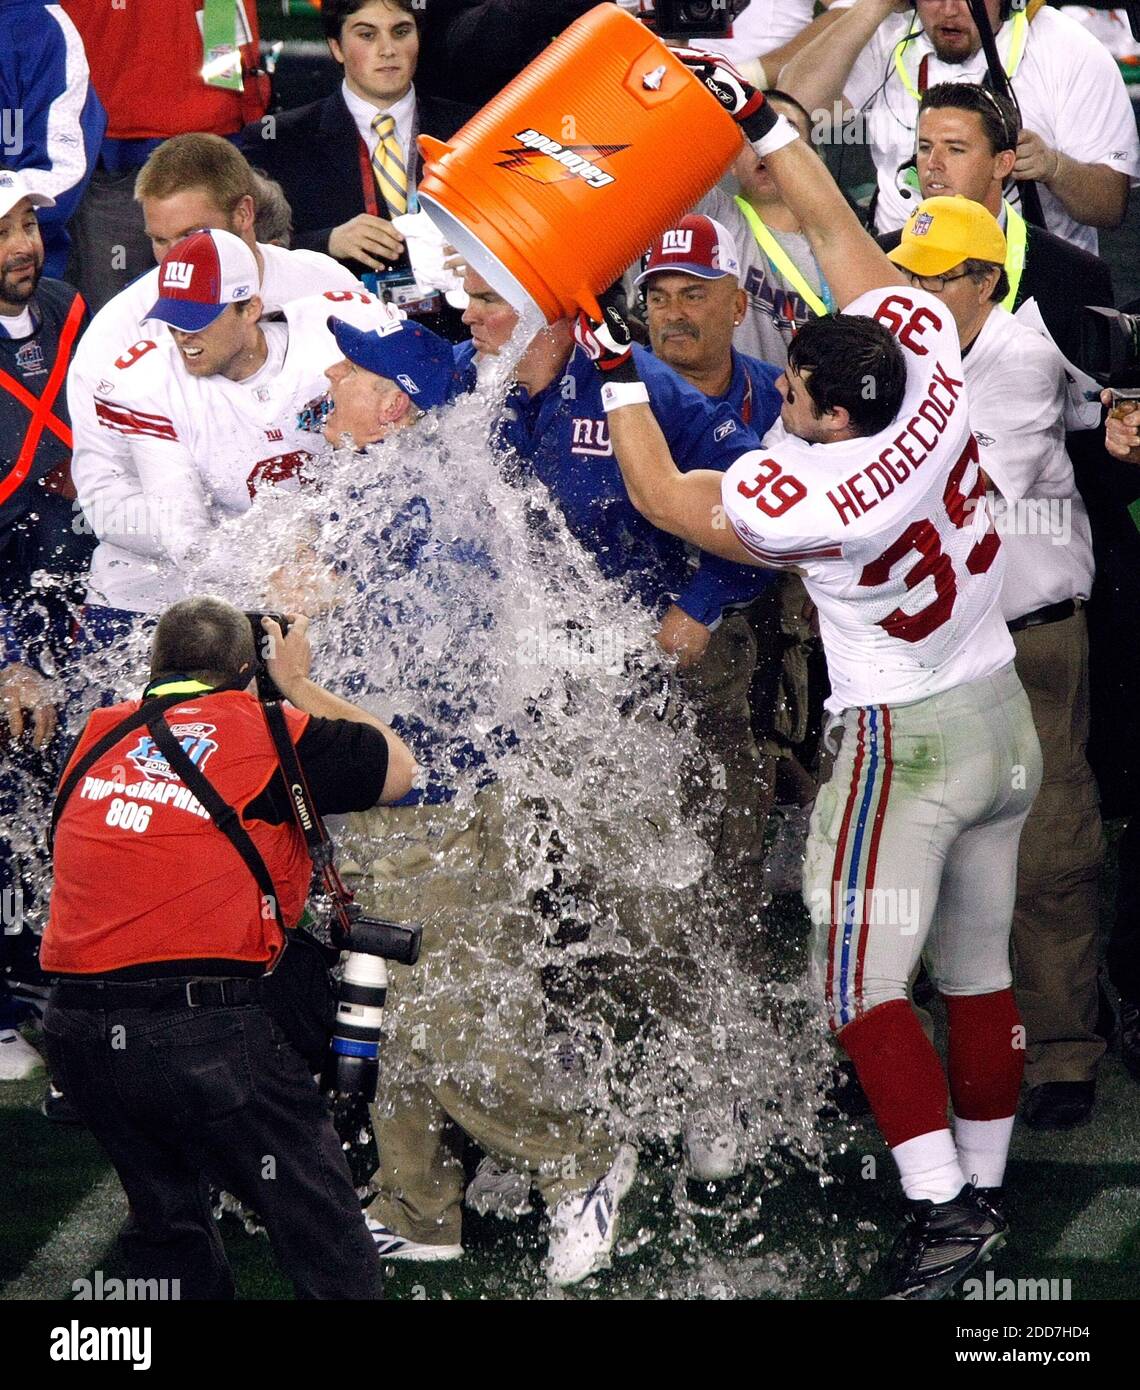 The New York Giants head coach Tom Coughlin gets doused at the end a 17-14 Giants' victory in Super Bowl XLII at University of Phoenix Stadium in Glendale, AZ, USA on February 3, 2008.  The NY Giants won 17-14. Photo by Jim Prisching/MCT/Cameleon/ABACAPRESS.COM Stock Photo